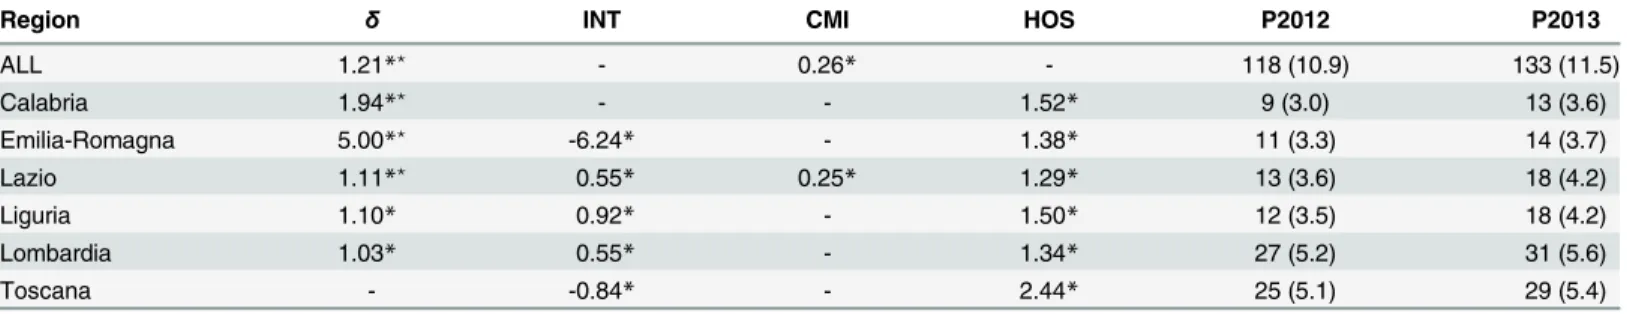 Table 10. Example of backtesting for claims due to alleged injuries for the Lombardia region